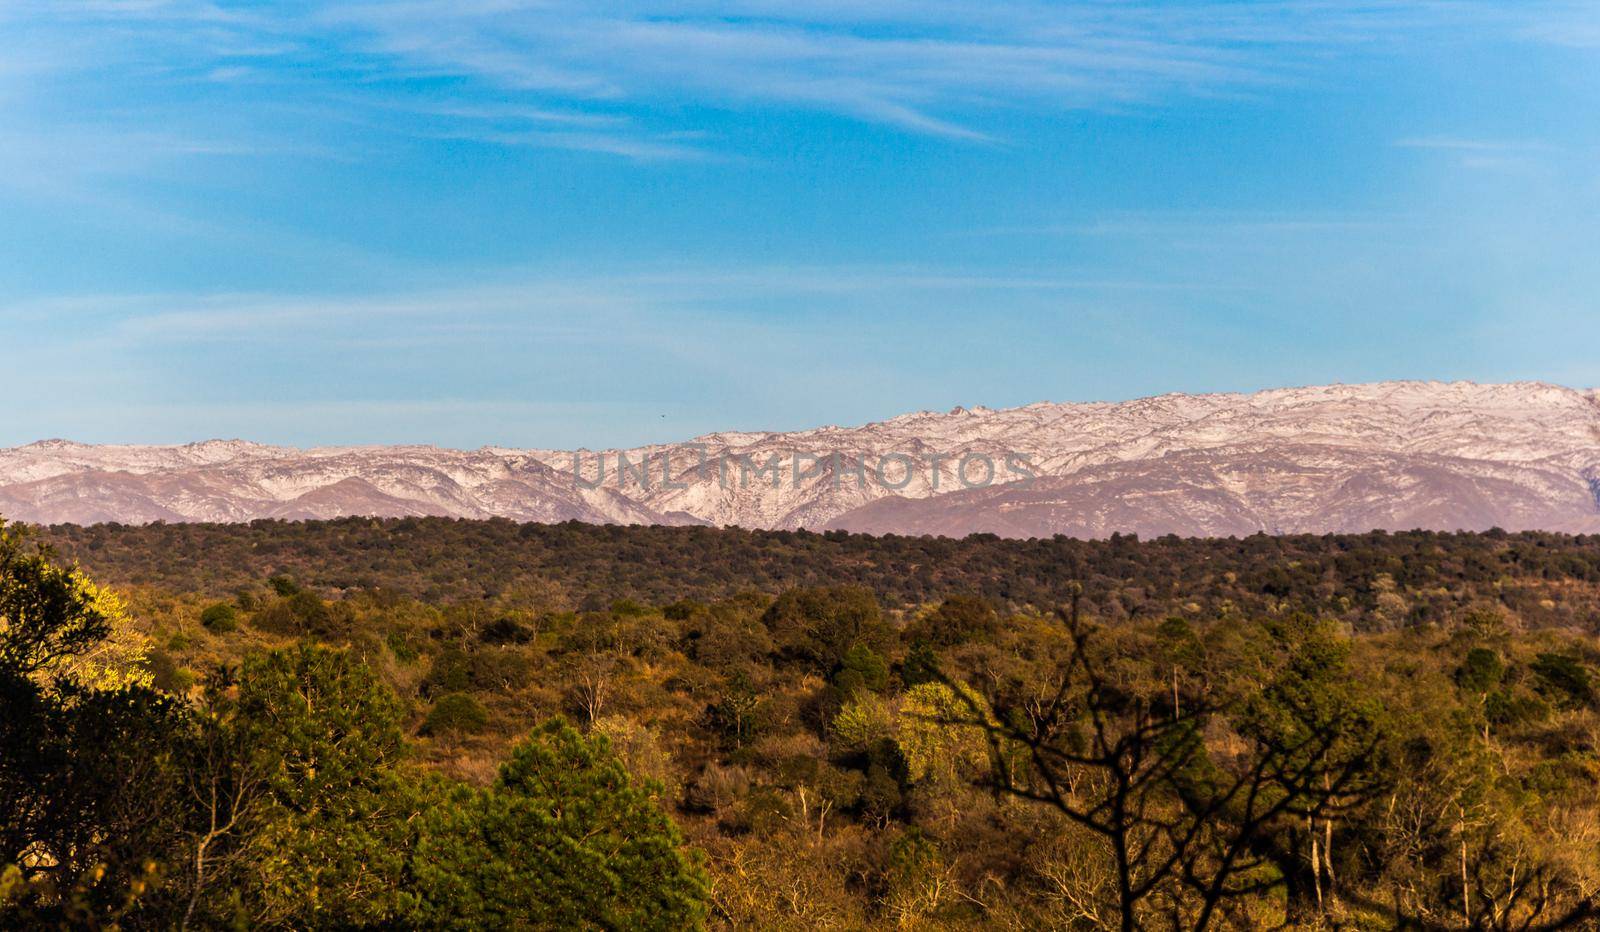 panoramic view of the snowy mountain ranges in the Calamuchita Valley, Cordoba, Argentina by GabrielaBertolini